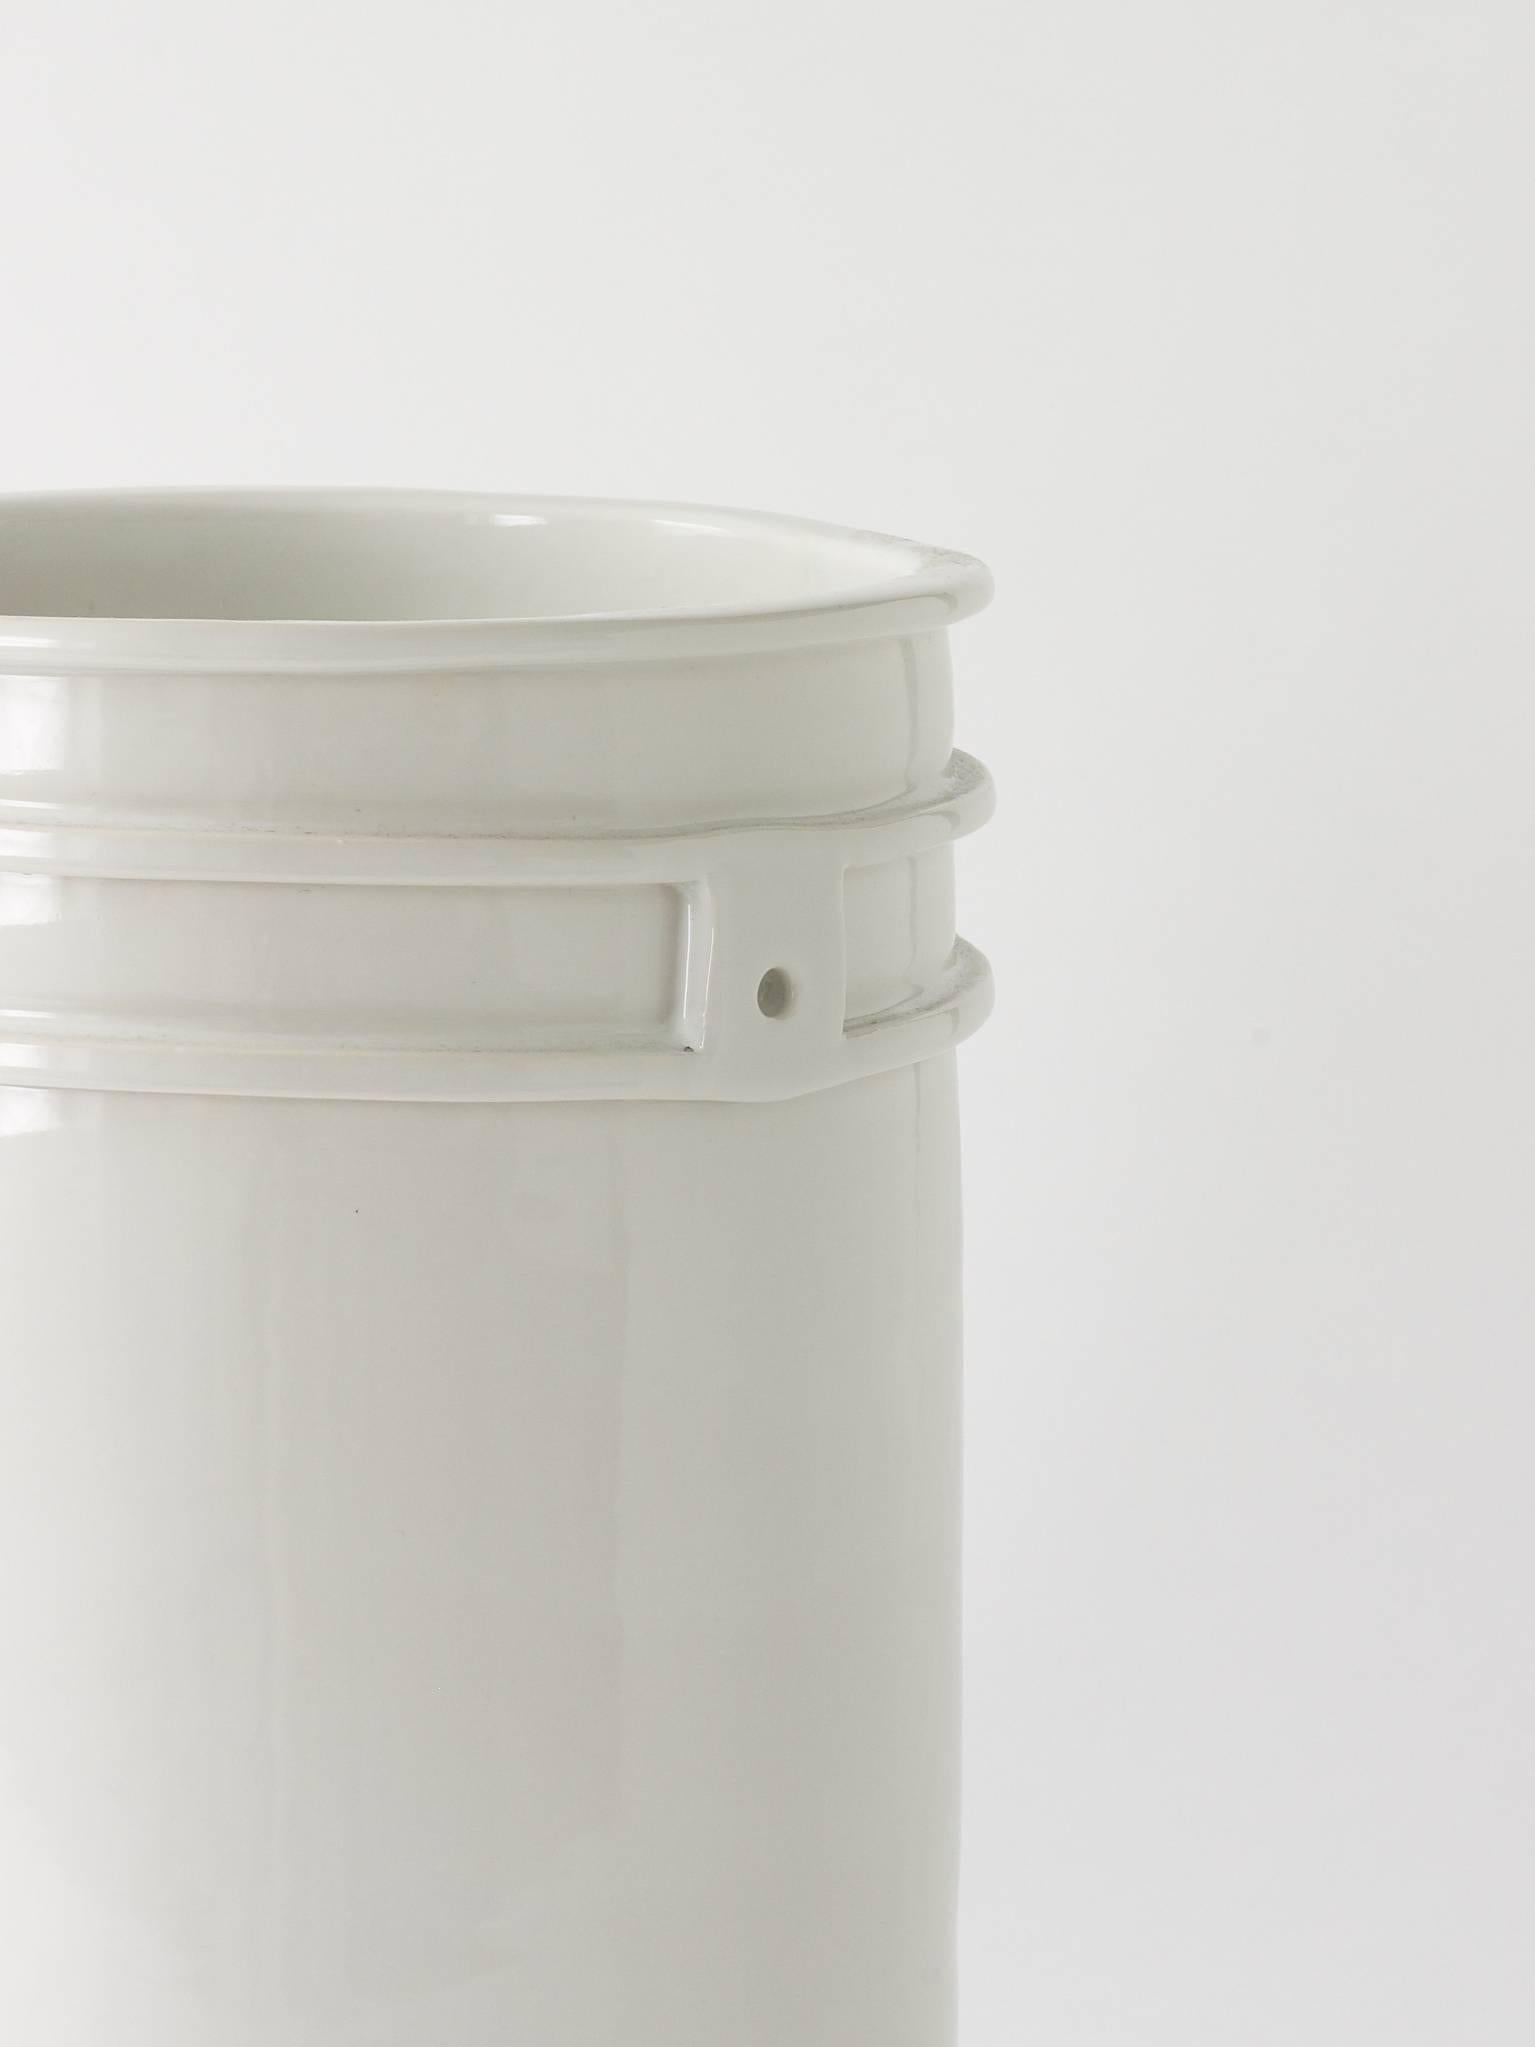 This white porcelain bucket by Matthias Merkel Hess is dated and marked with a unique pattern on the underside.

The bucket measures 11.5” diameter by 15.25” high.

Sculptor, potter, maker, manufacturer and merchandiser, Matthias Merkel Hess